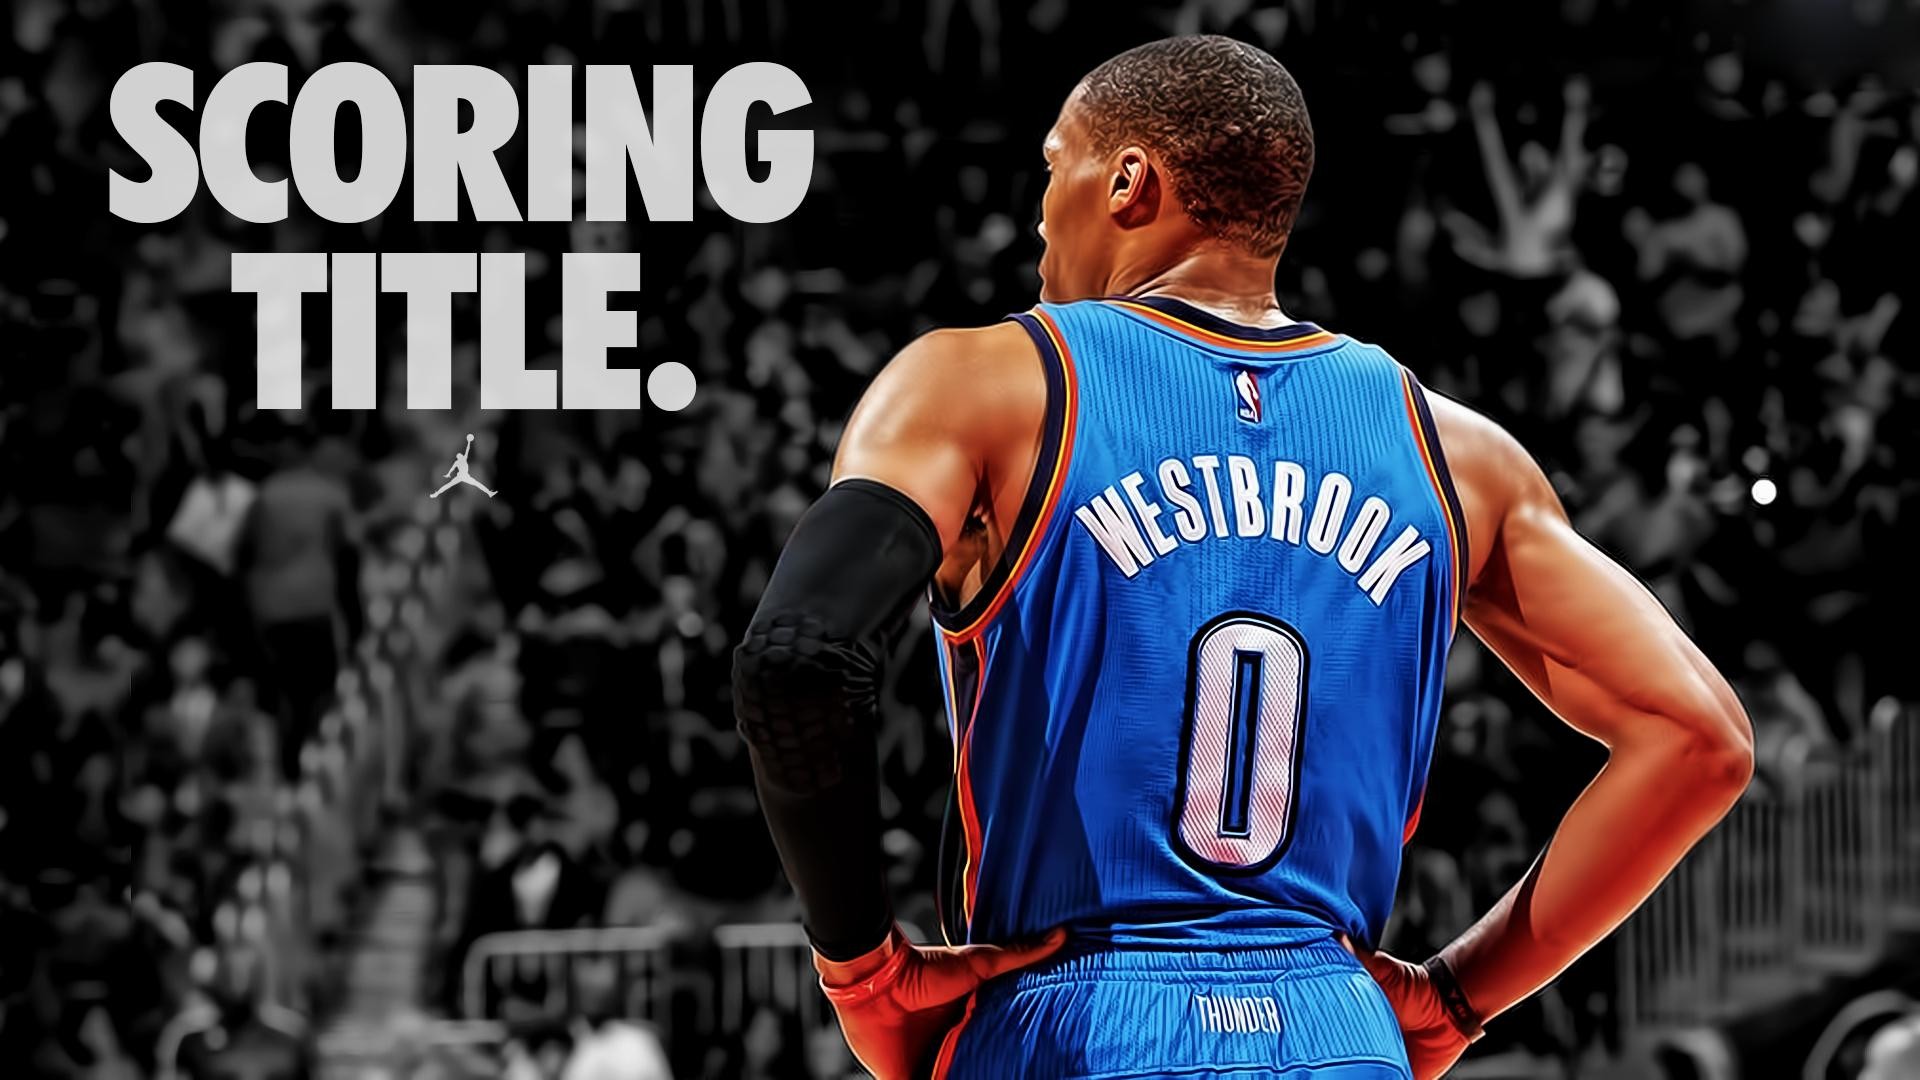 Wallpaper.wiki Russell Westbrook Backgrounds Free Download PIC